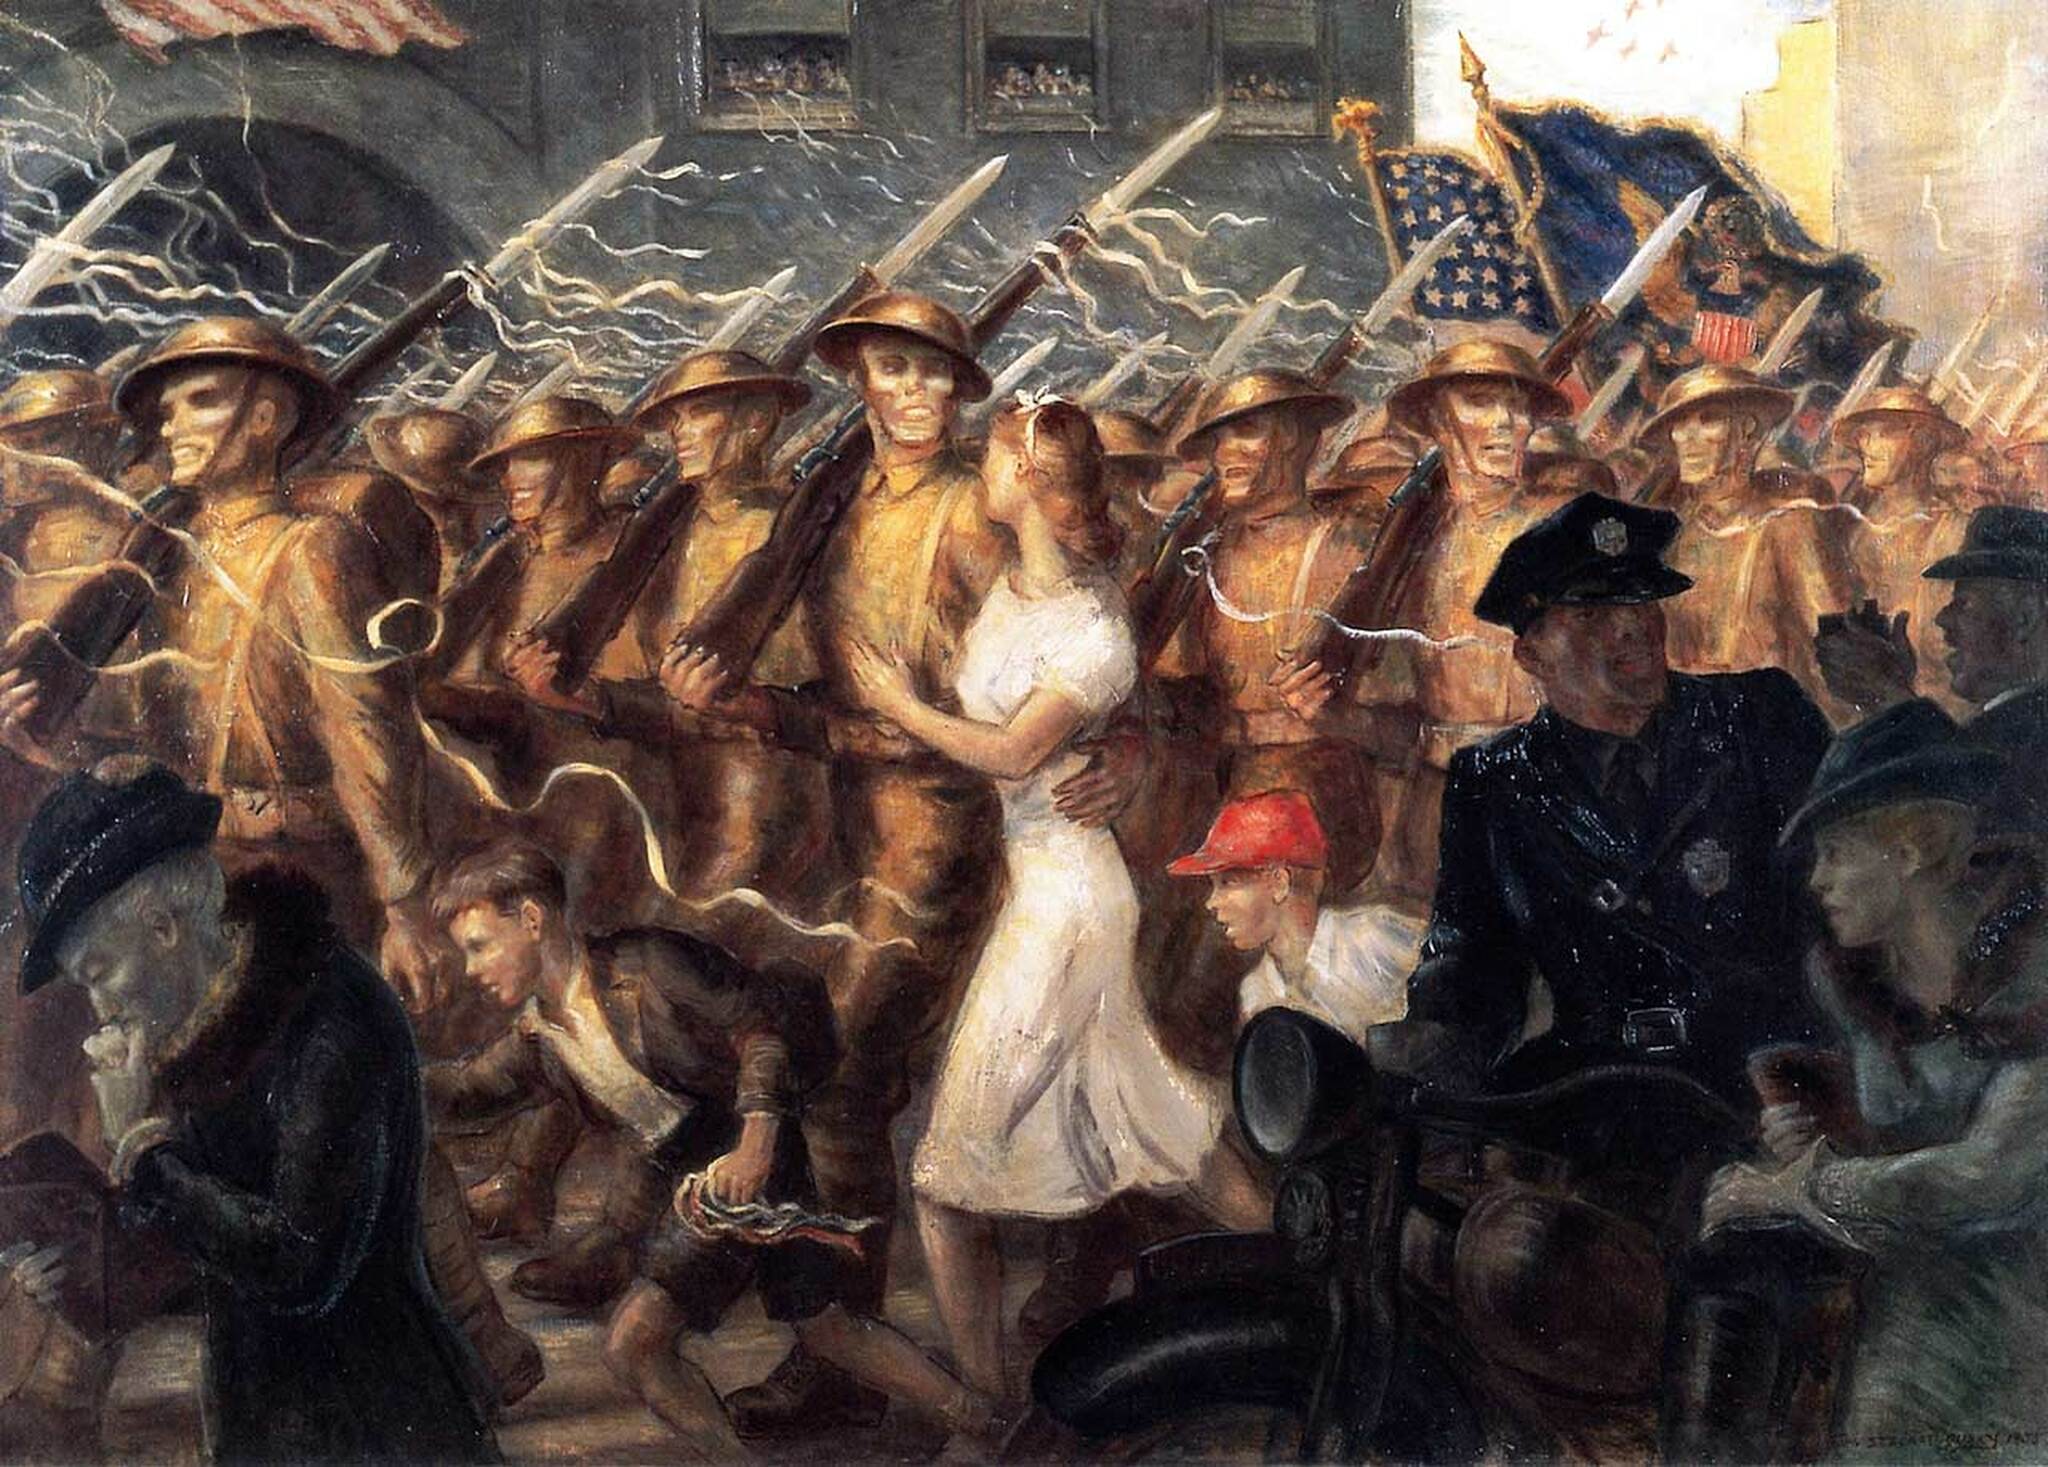 Parade to War, Allegory by John Steuart Curry (1938)